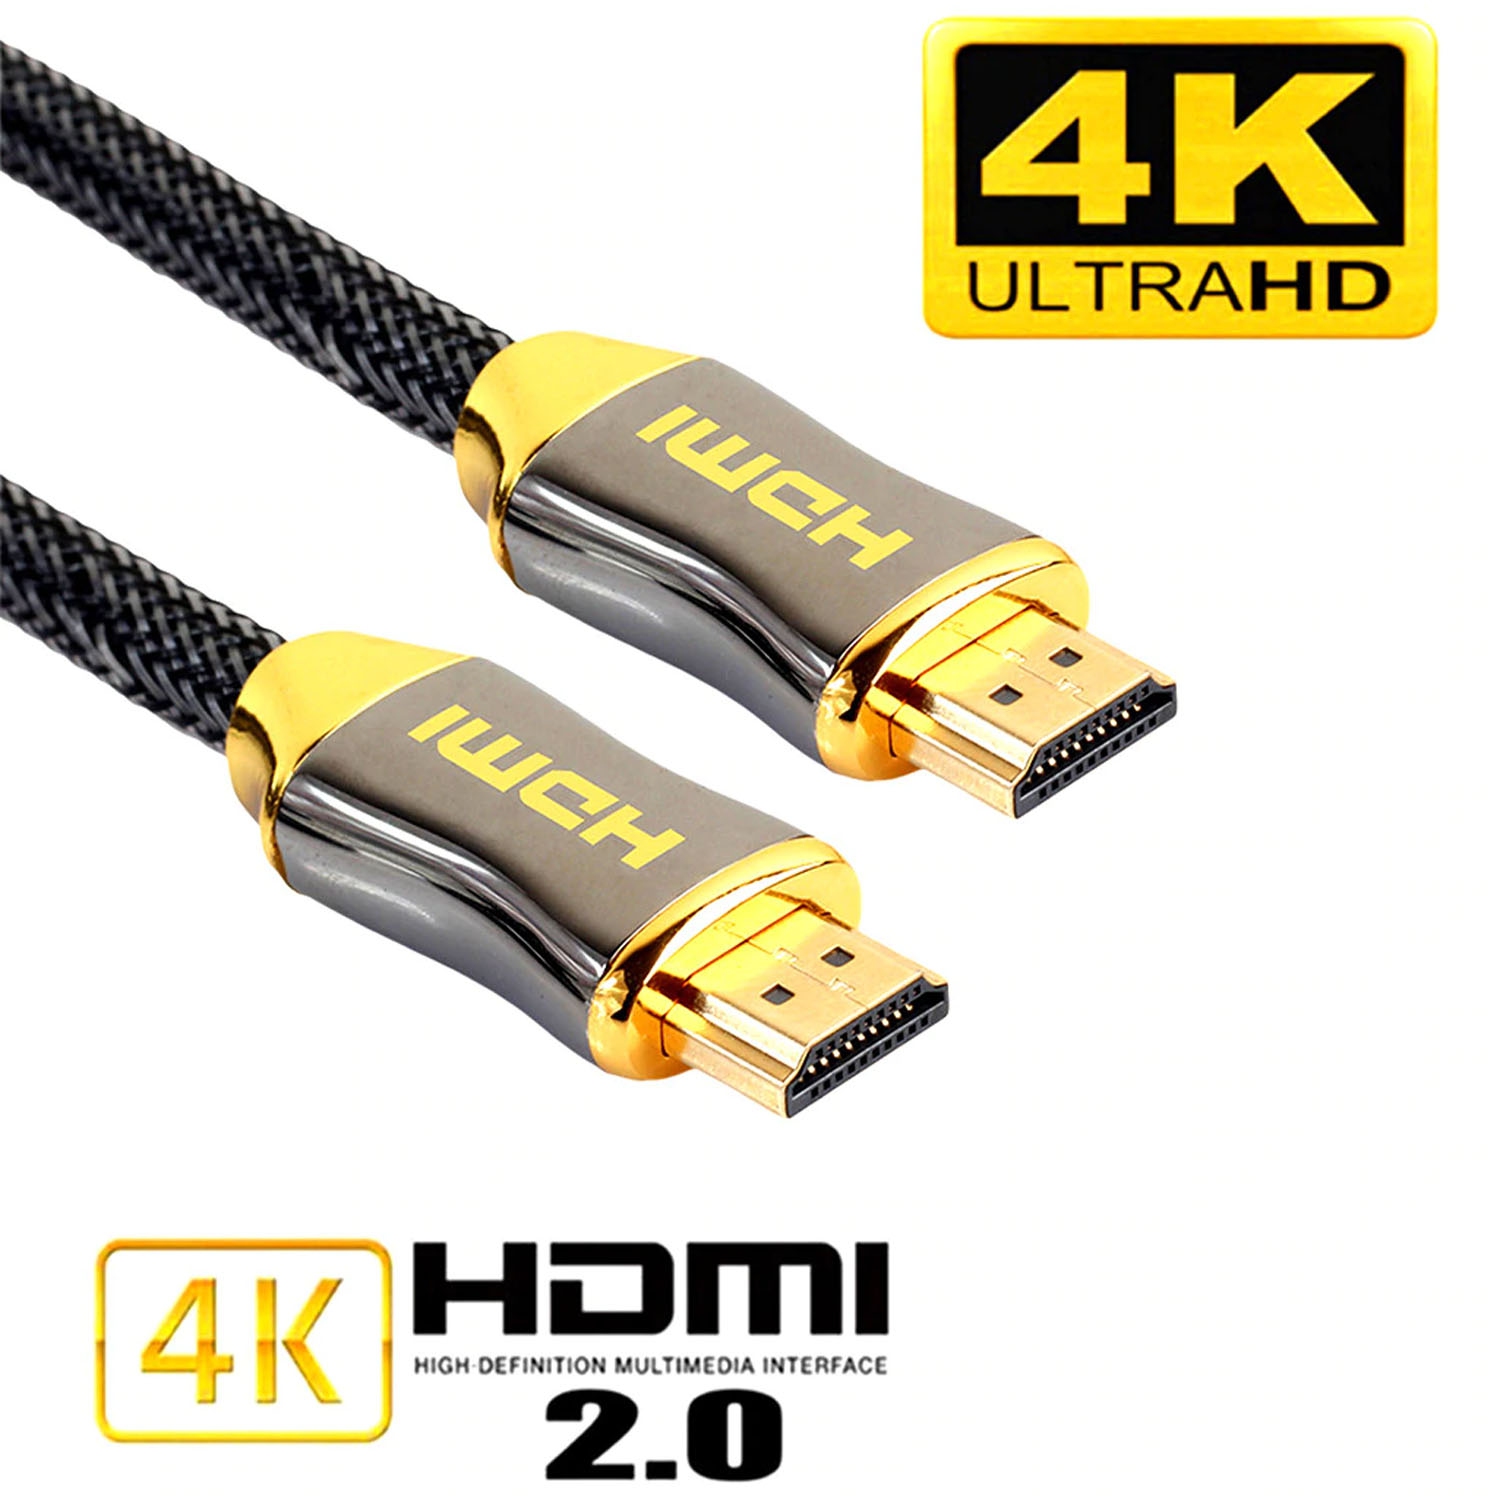 ISTAR 4K 60Hz HDMI Cable HDR, HDCP 2.2/1.4 18Gbps High Speed Audio Video HDMI to HDMI Cable Braided Cord for Samsung LG SONY TCL PS5 PS4 TV box 8K Splitter Switch Box (10M / 32.8ft)